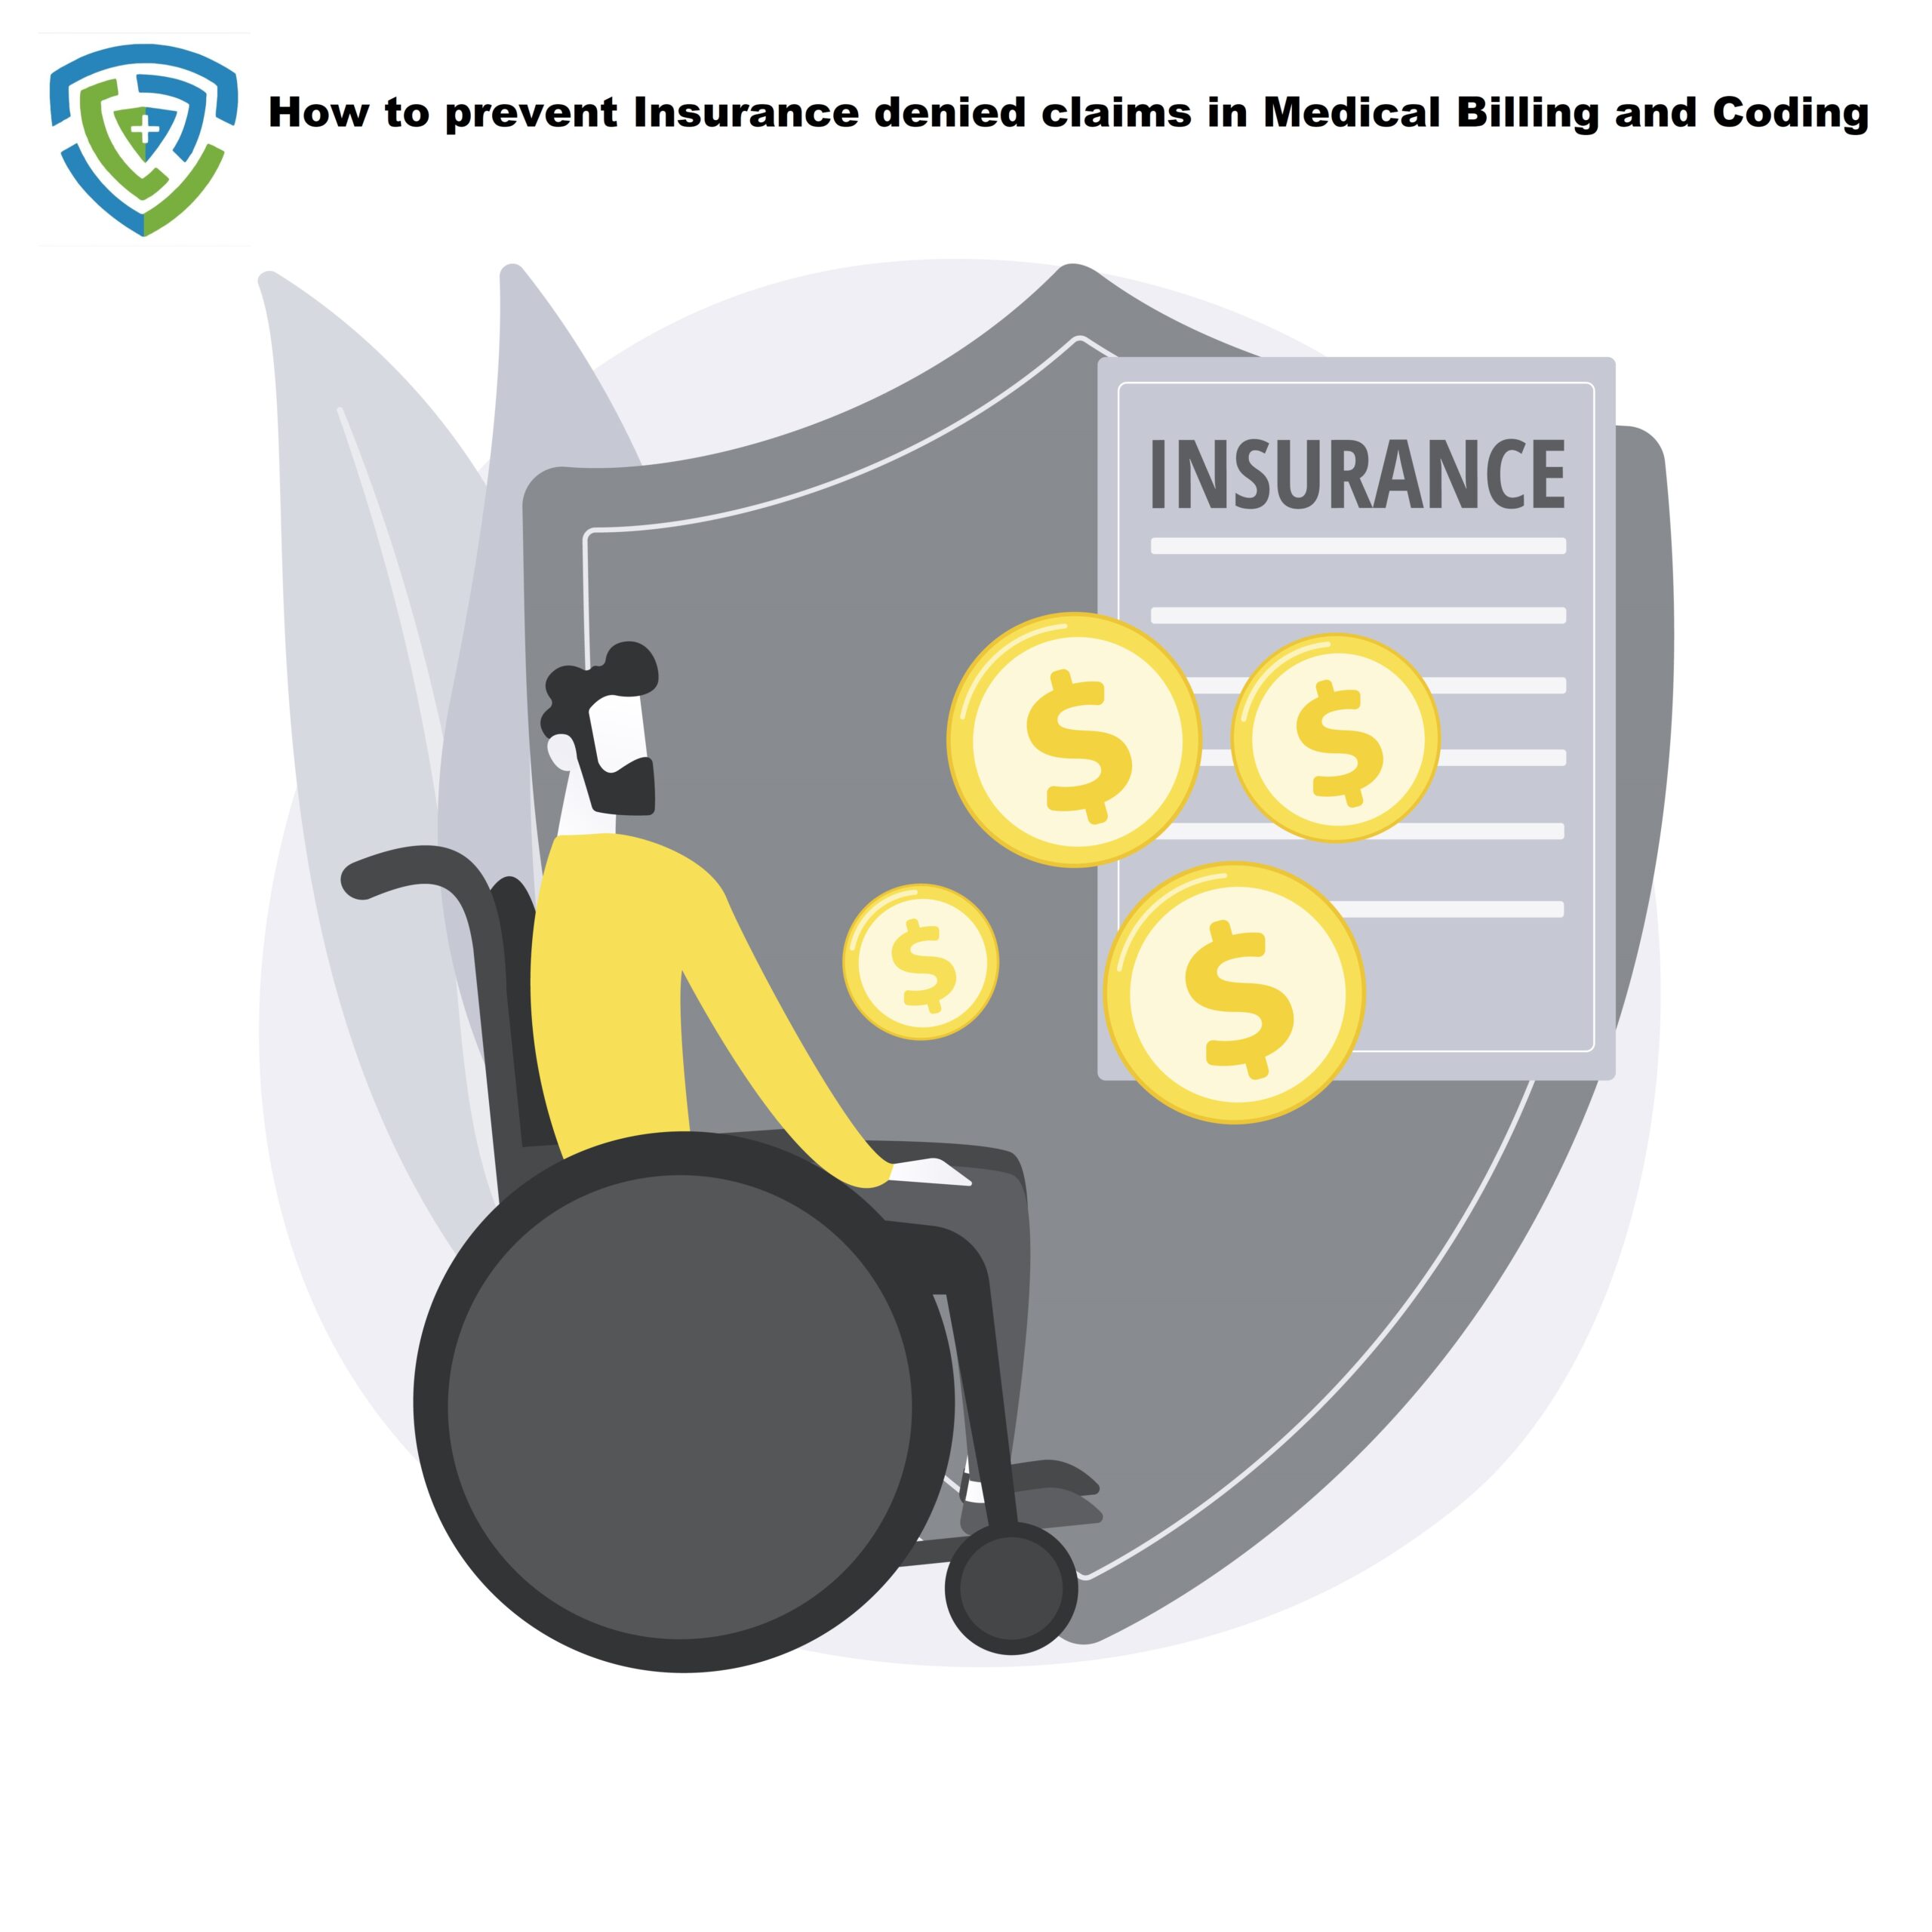 How to prevent Insurance denied claims in Medical Billing and Coding